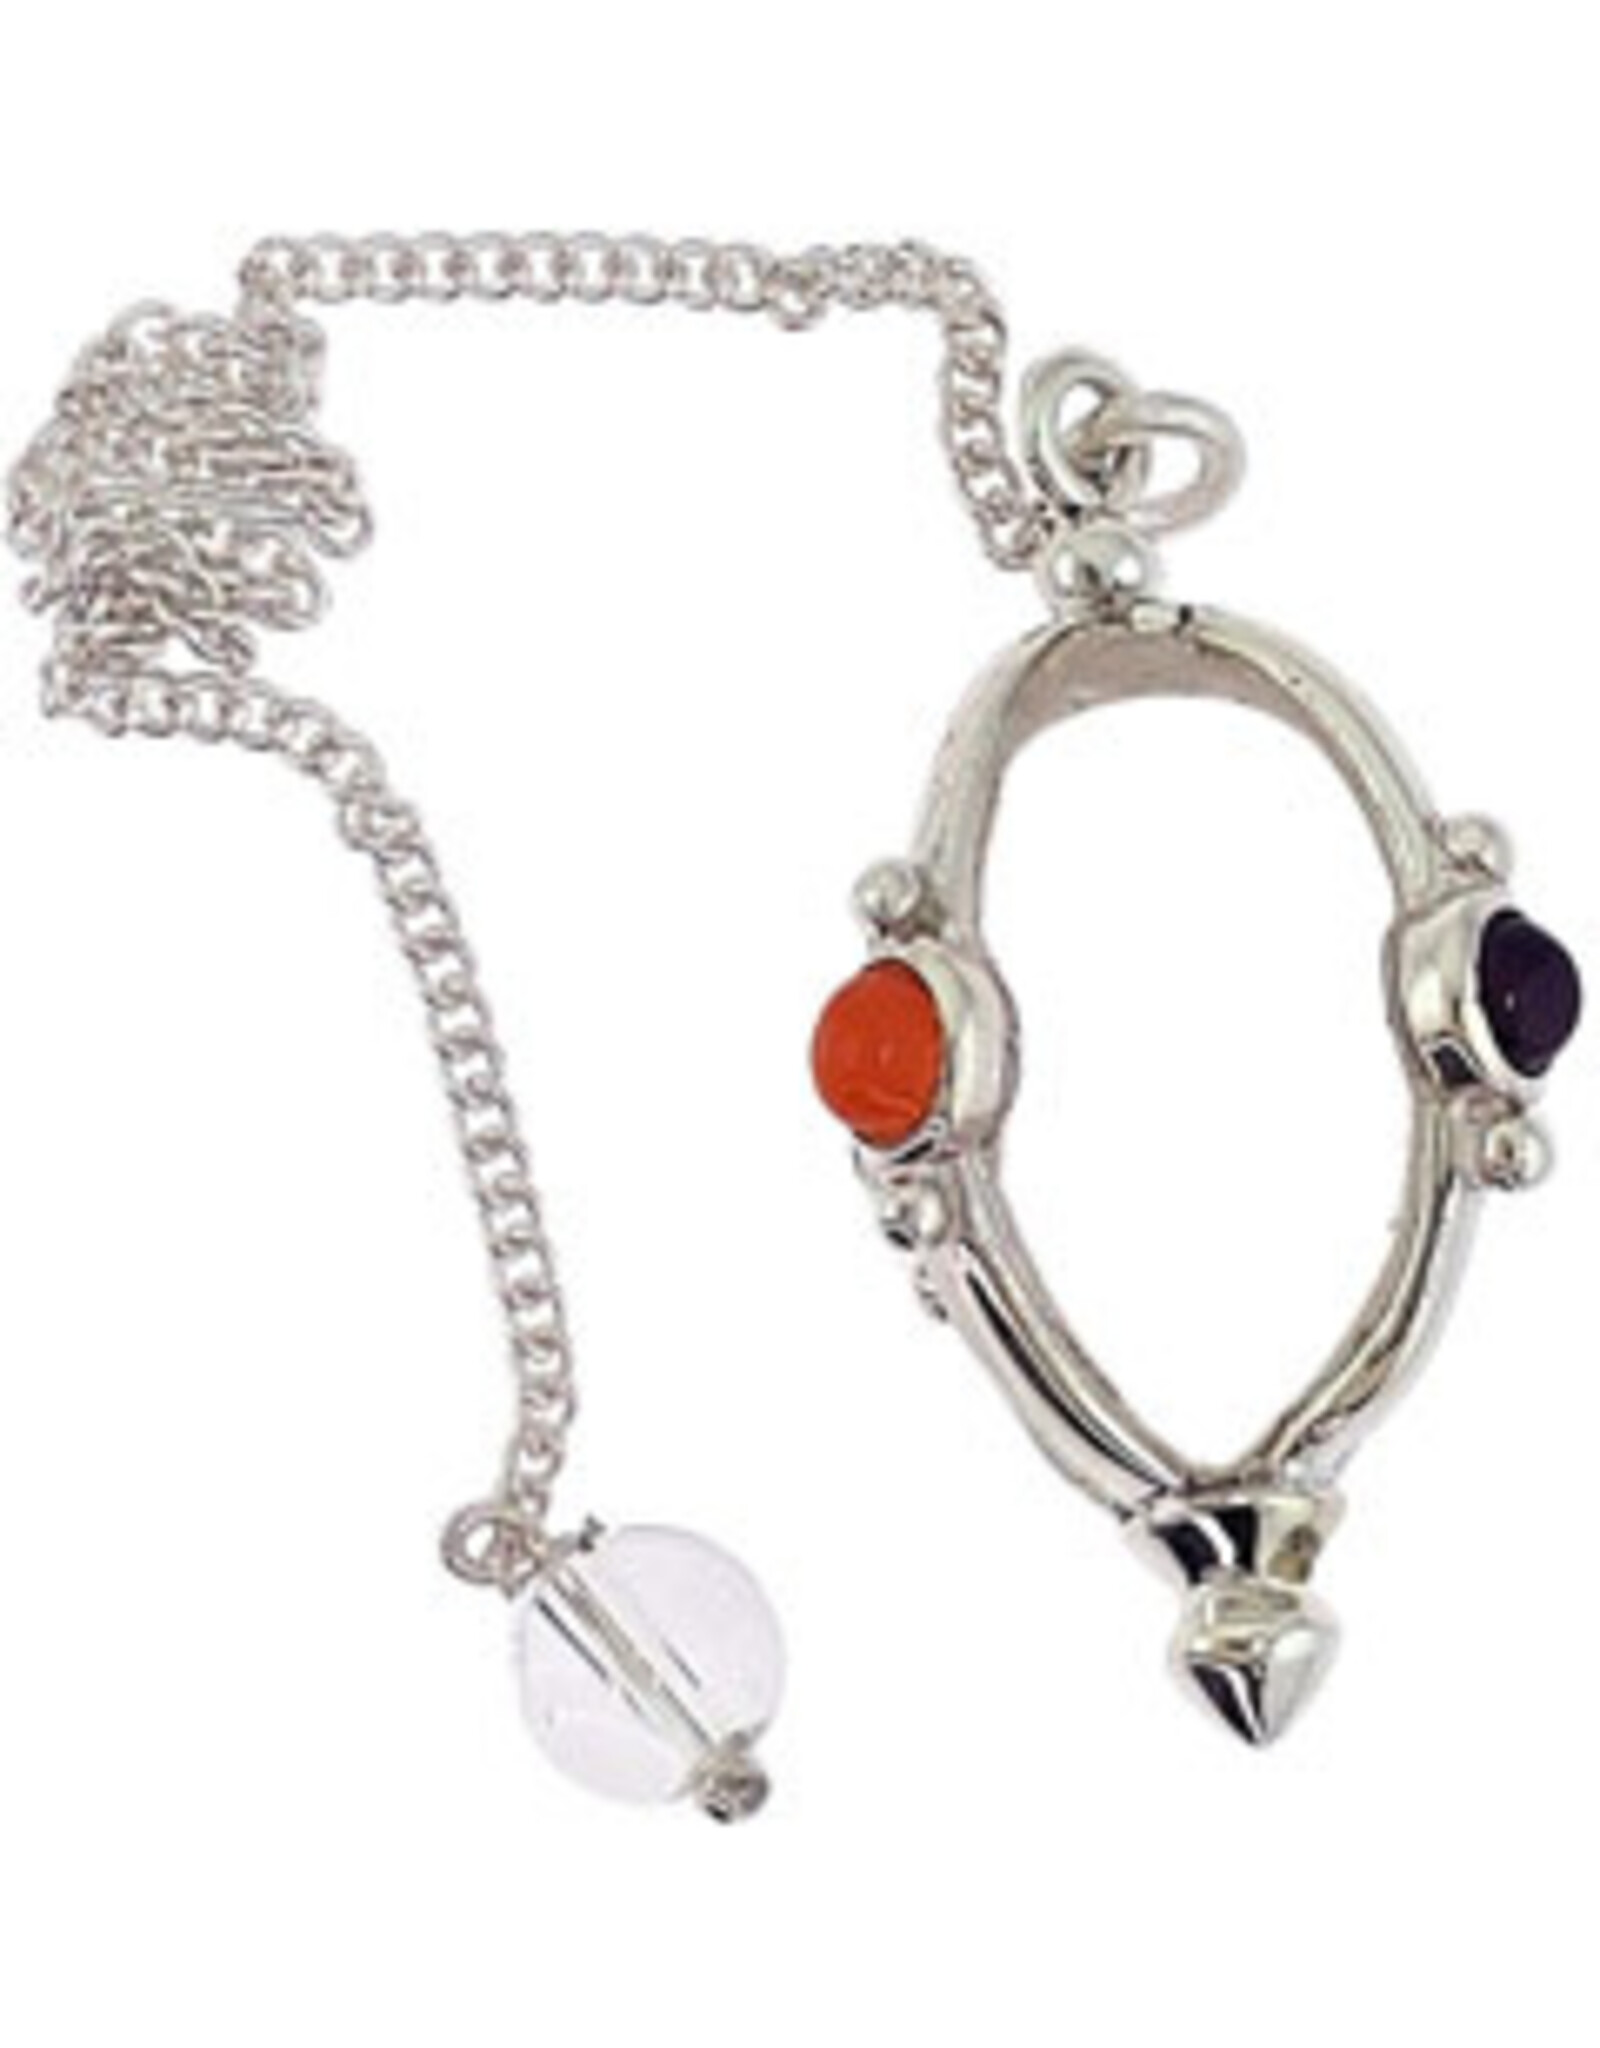 Gallery Pendulum 4 Directional with Natural Stones Sterling Silver